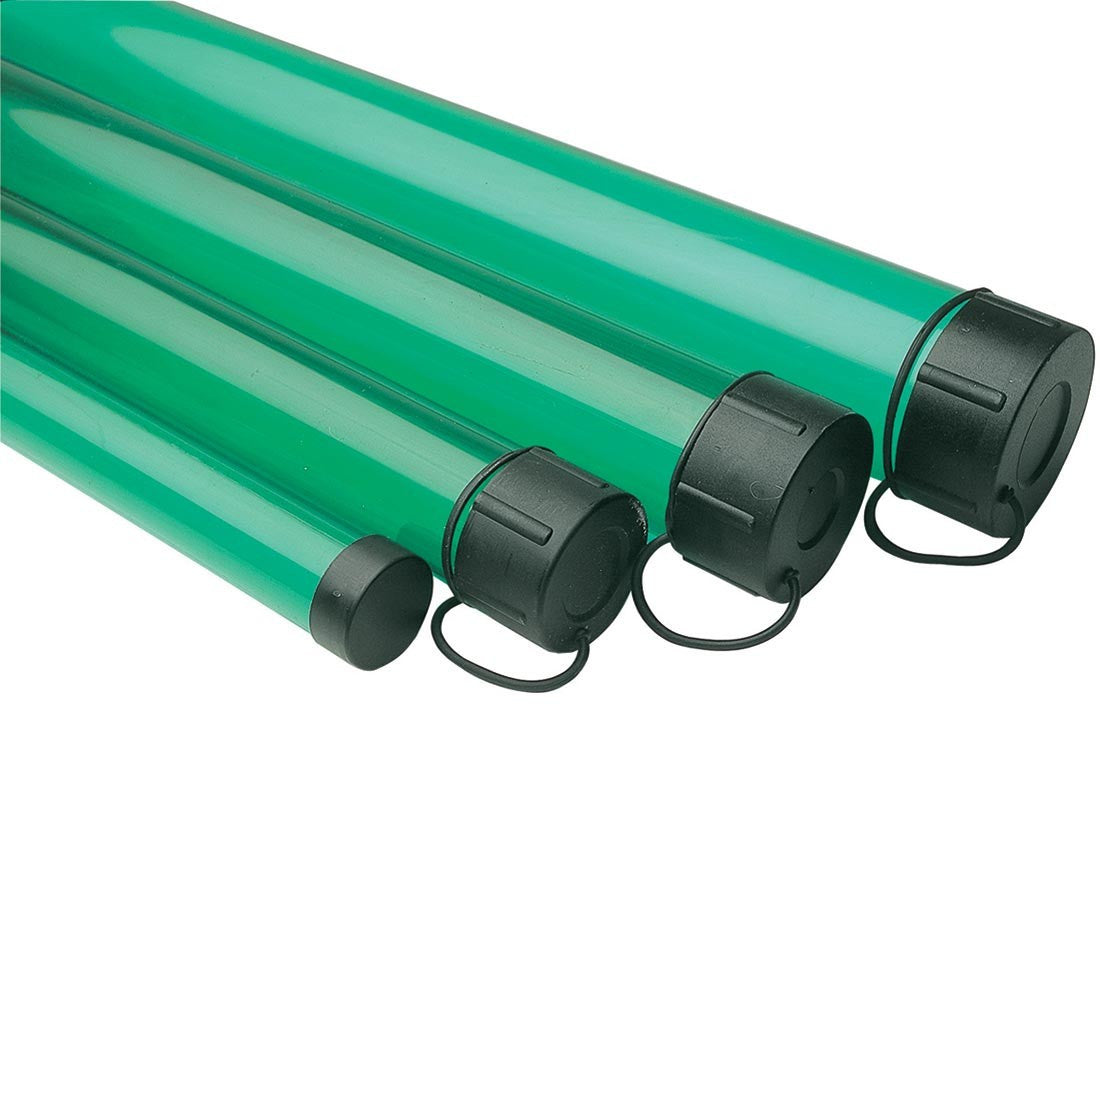 Plano Guide Series Telescopic Airliner Rod Tube